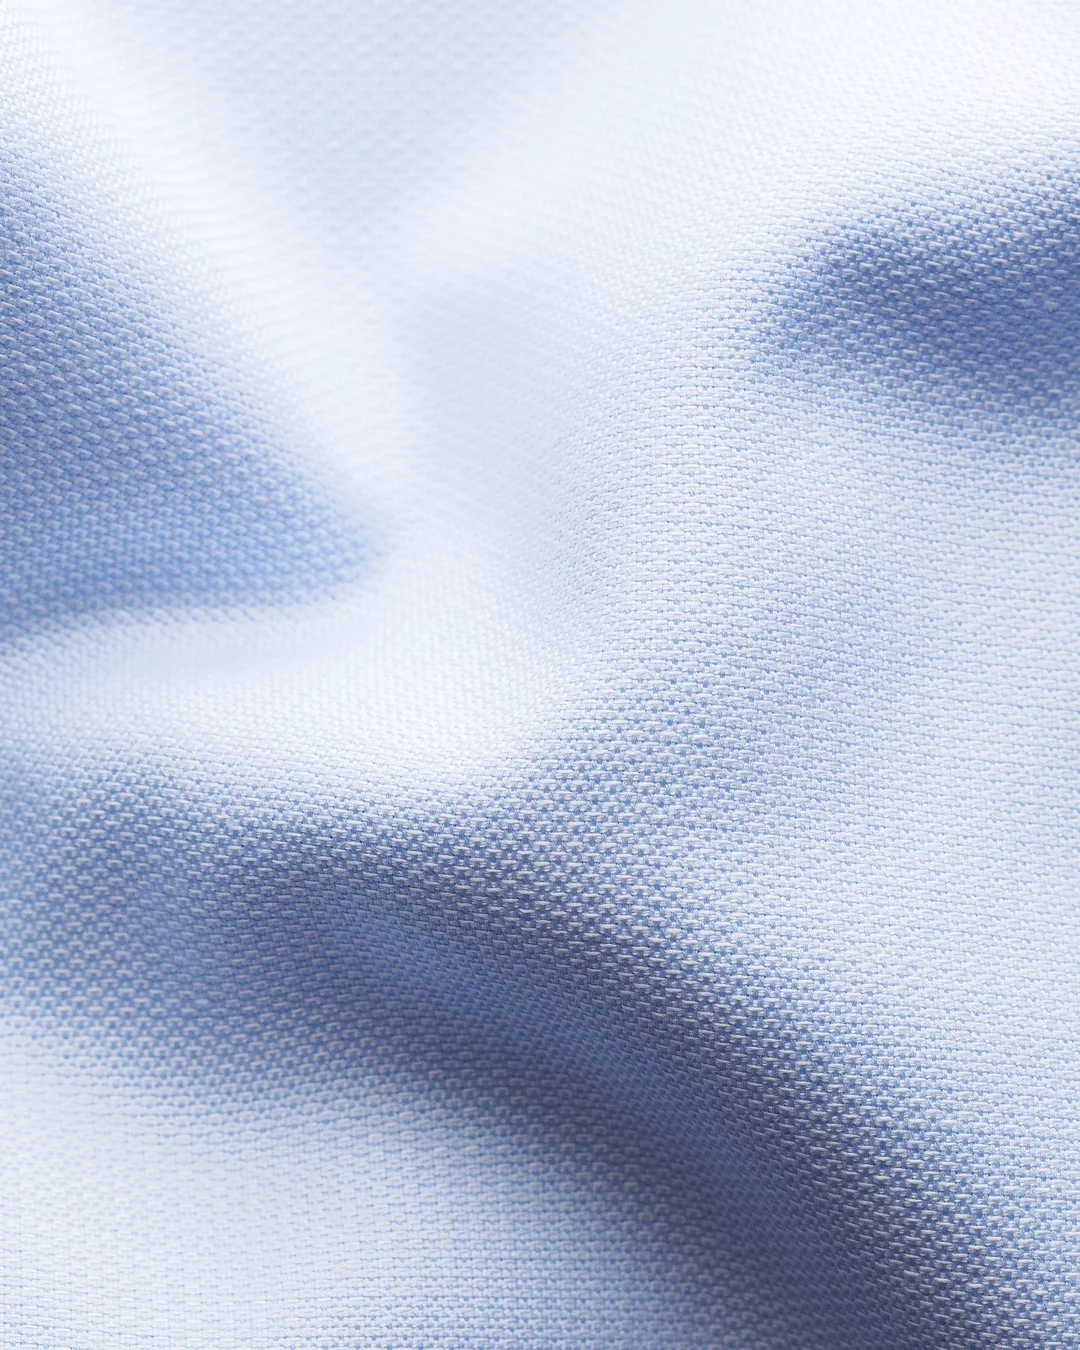 Blue gray fabric texture background. A piece of cotton fabric is